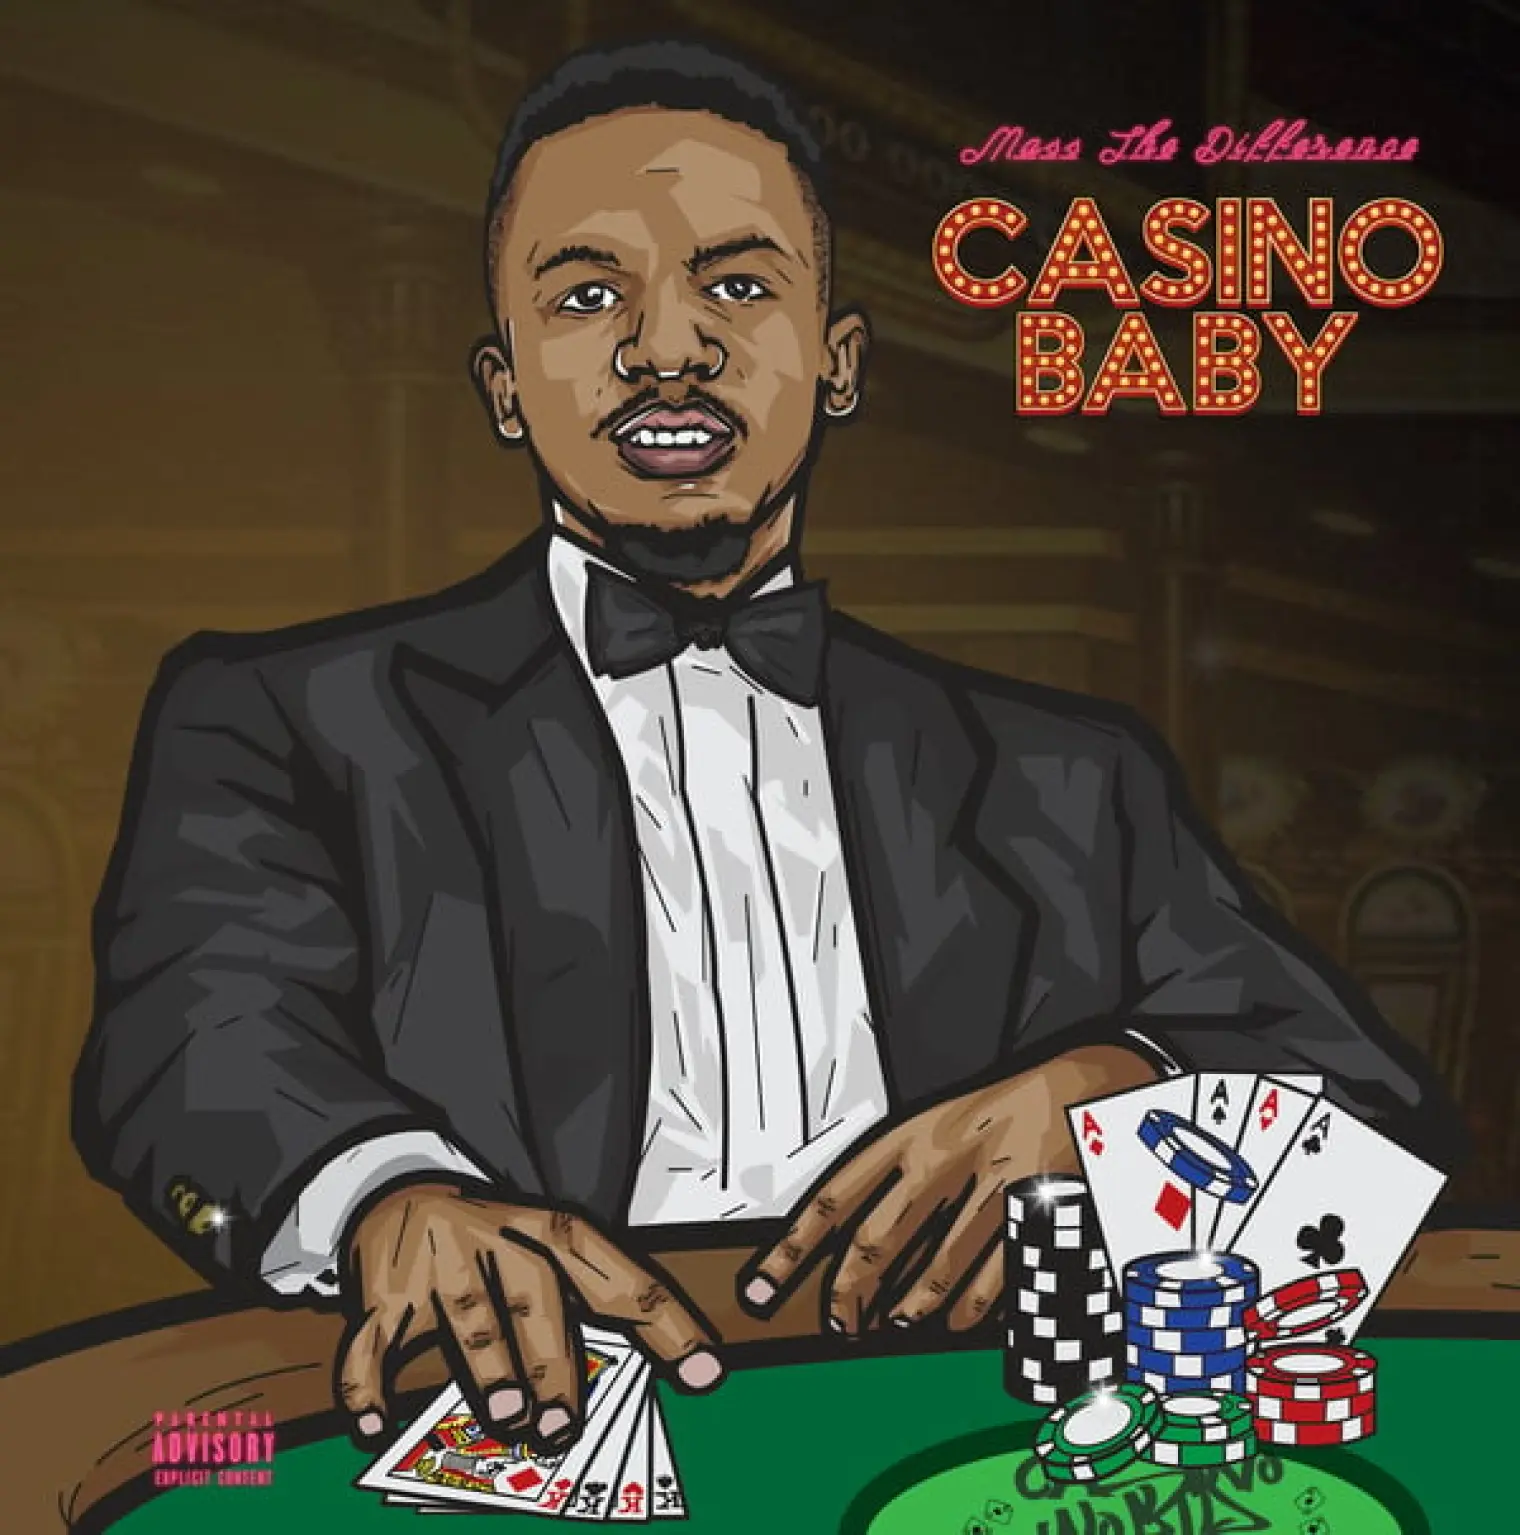 Casino Baby -  Mass The Difference 